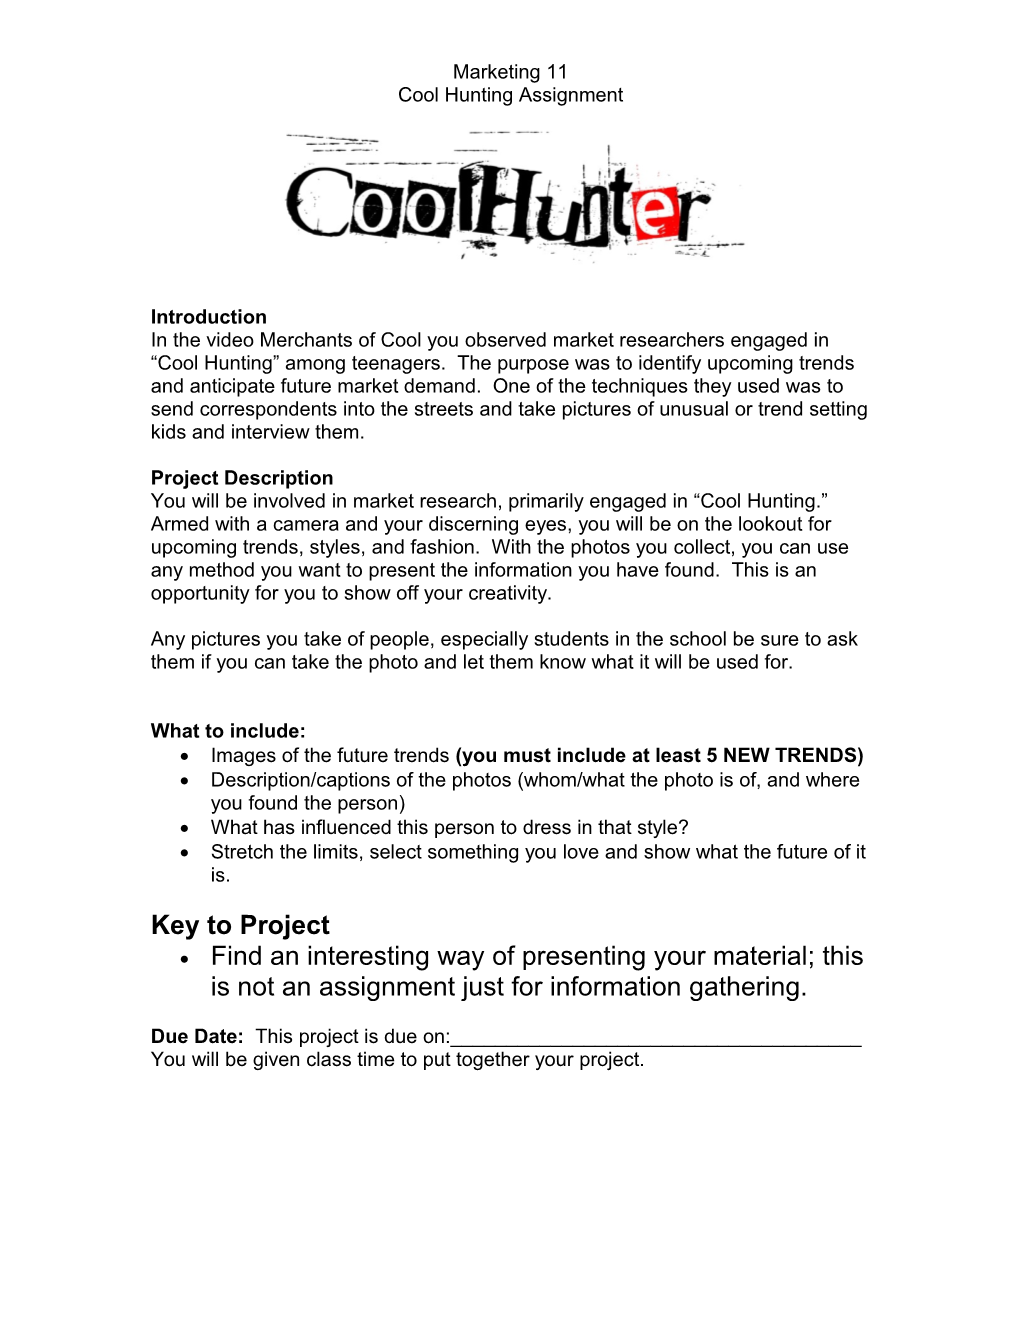 Cool Hunting Poster Rubric 20 Marks